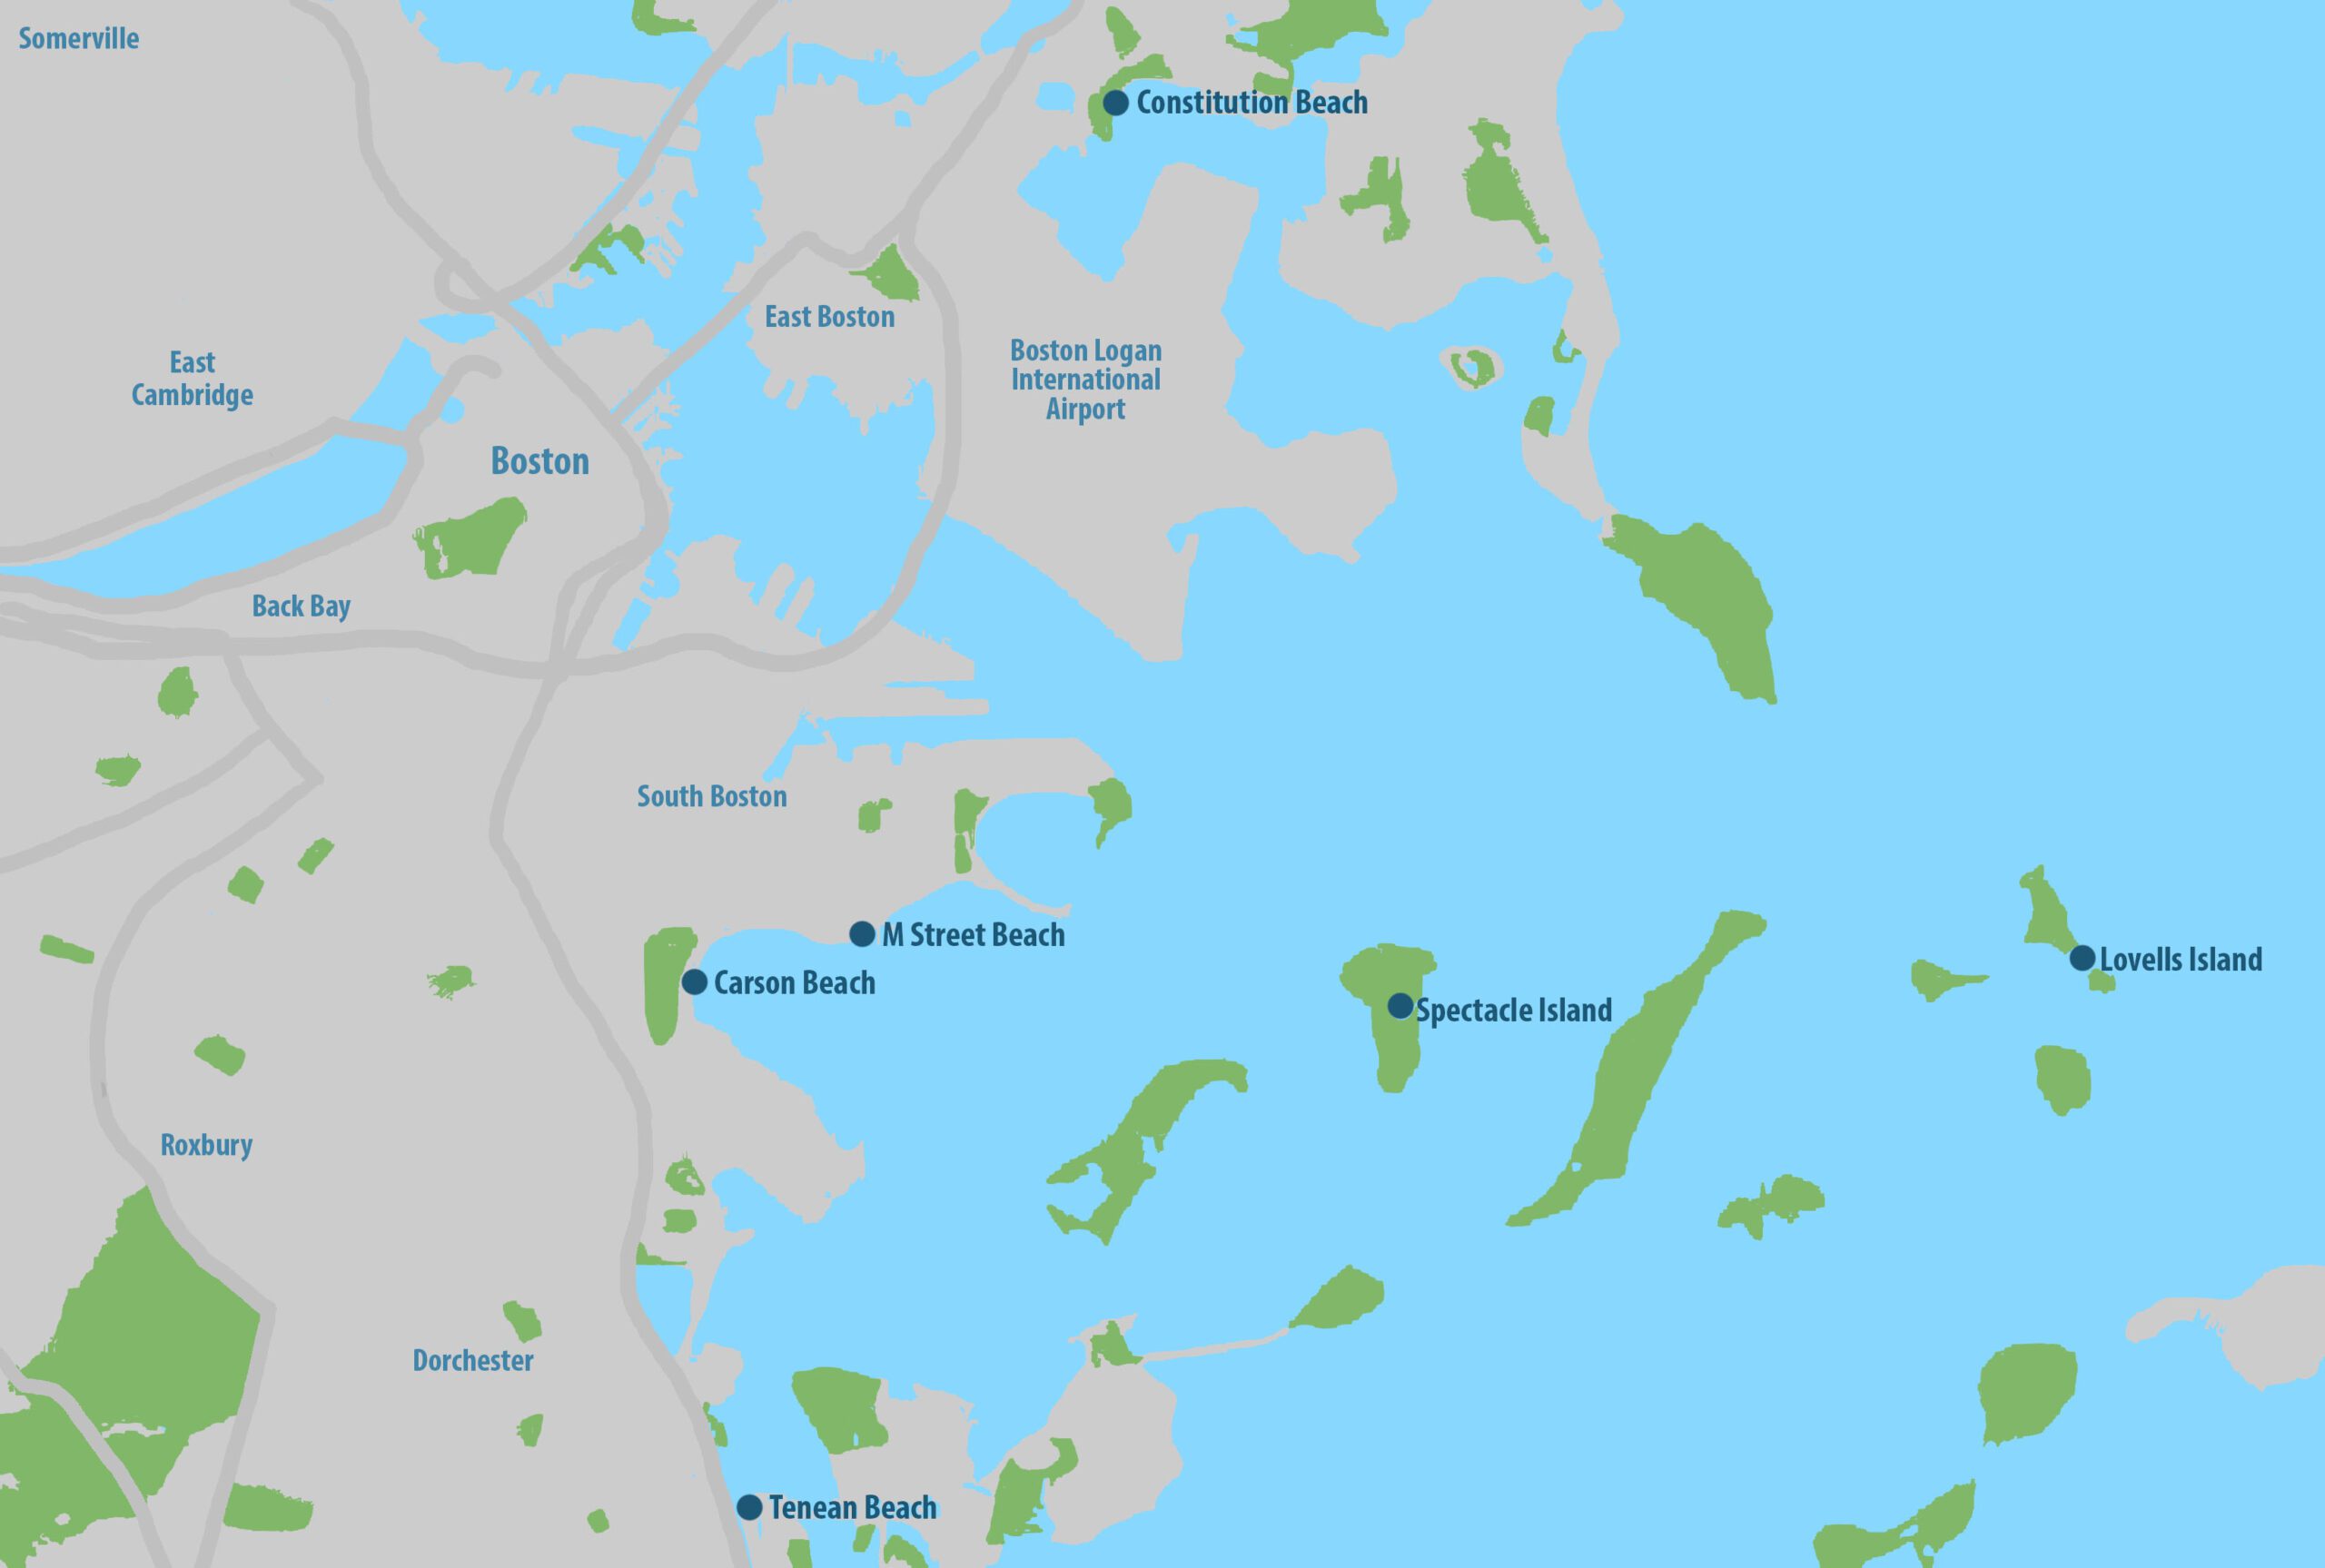 Image of a map of the beaches in the Boston area